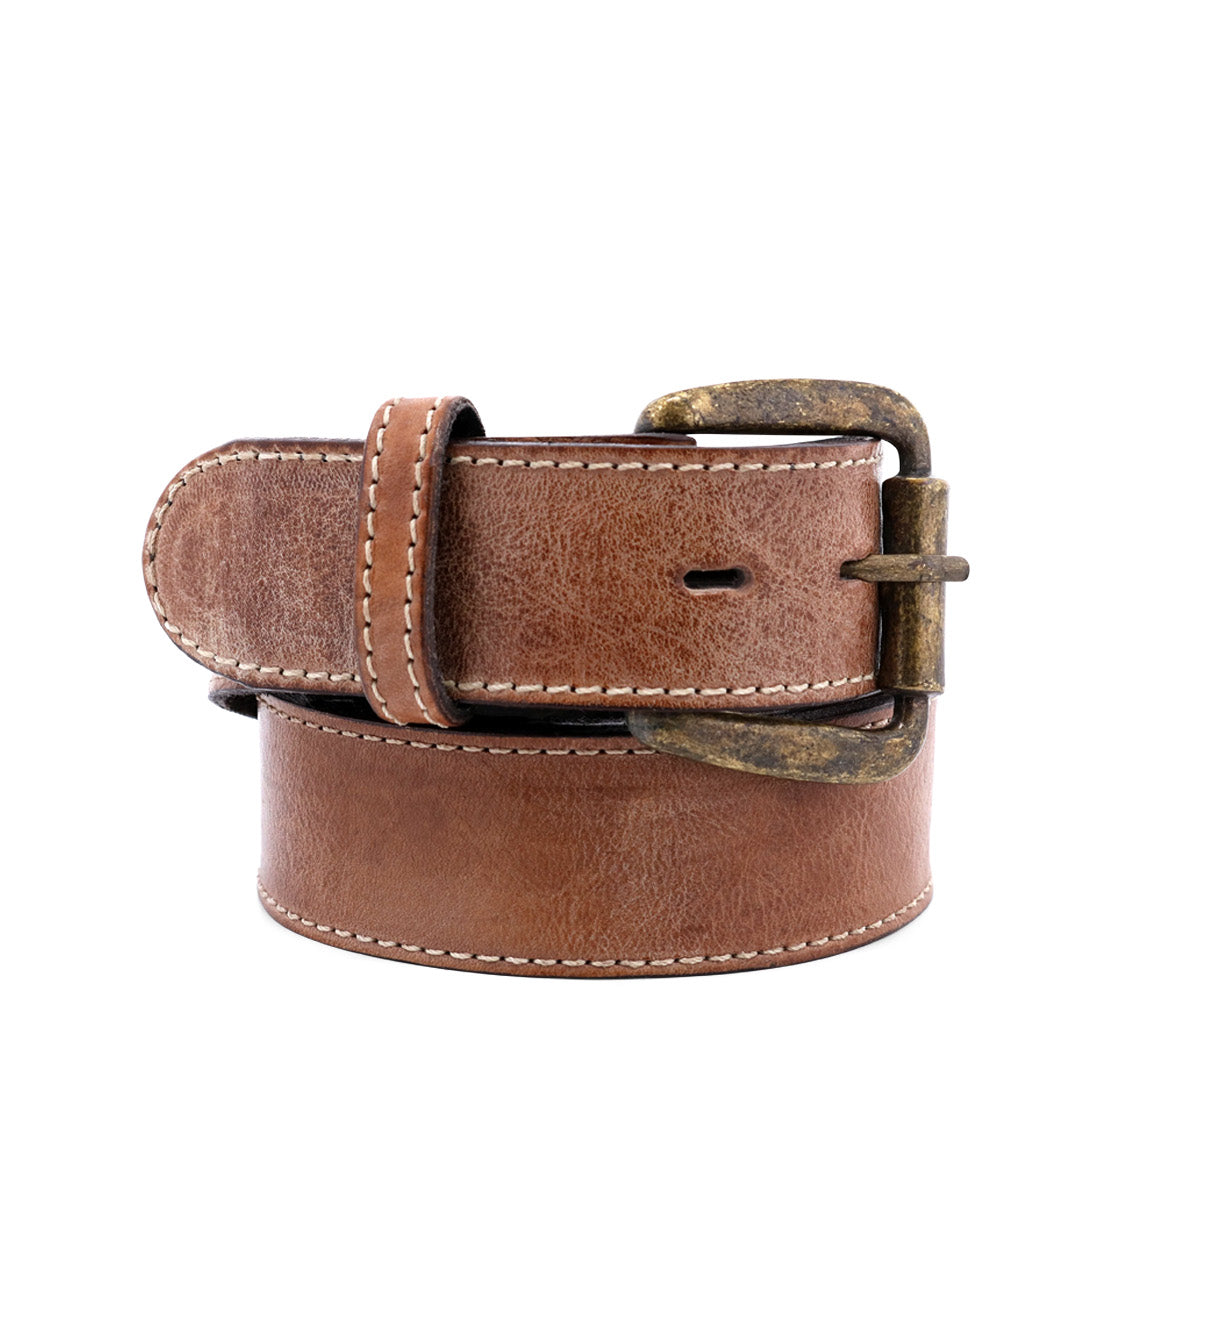 A Meander leather belt with a metal buckle from Bed Stu.